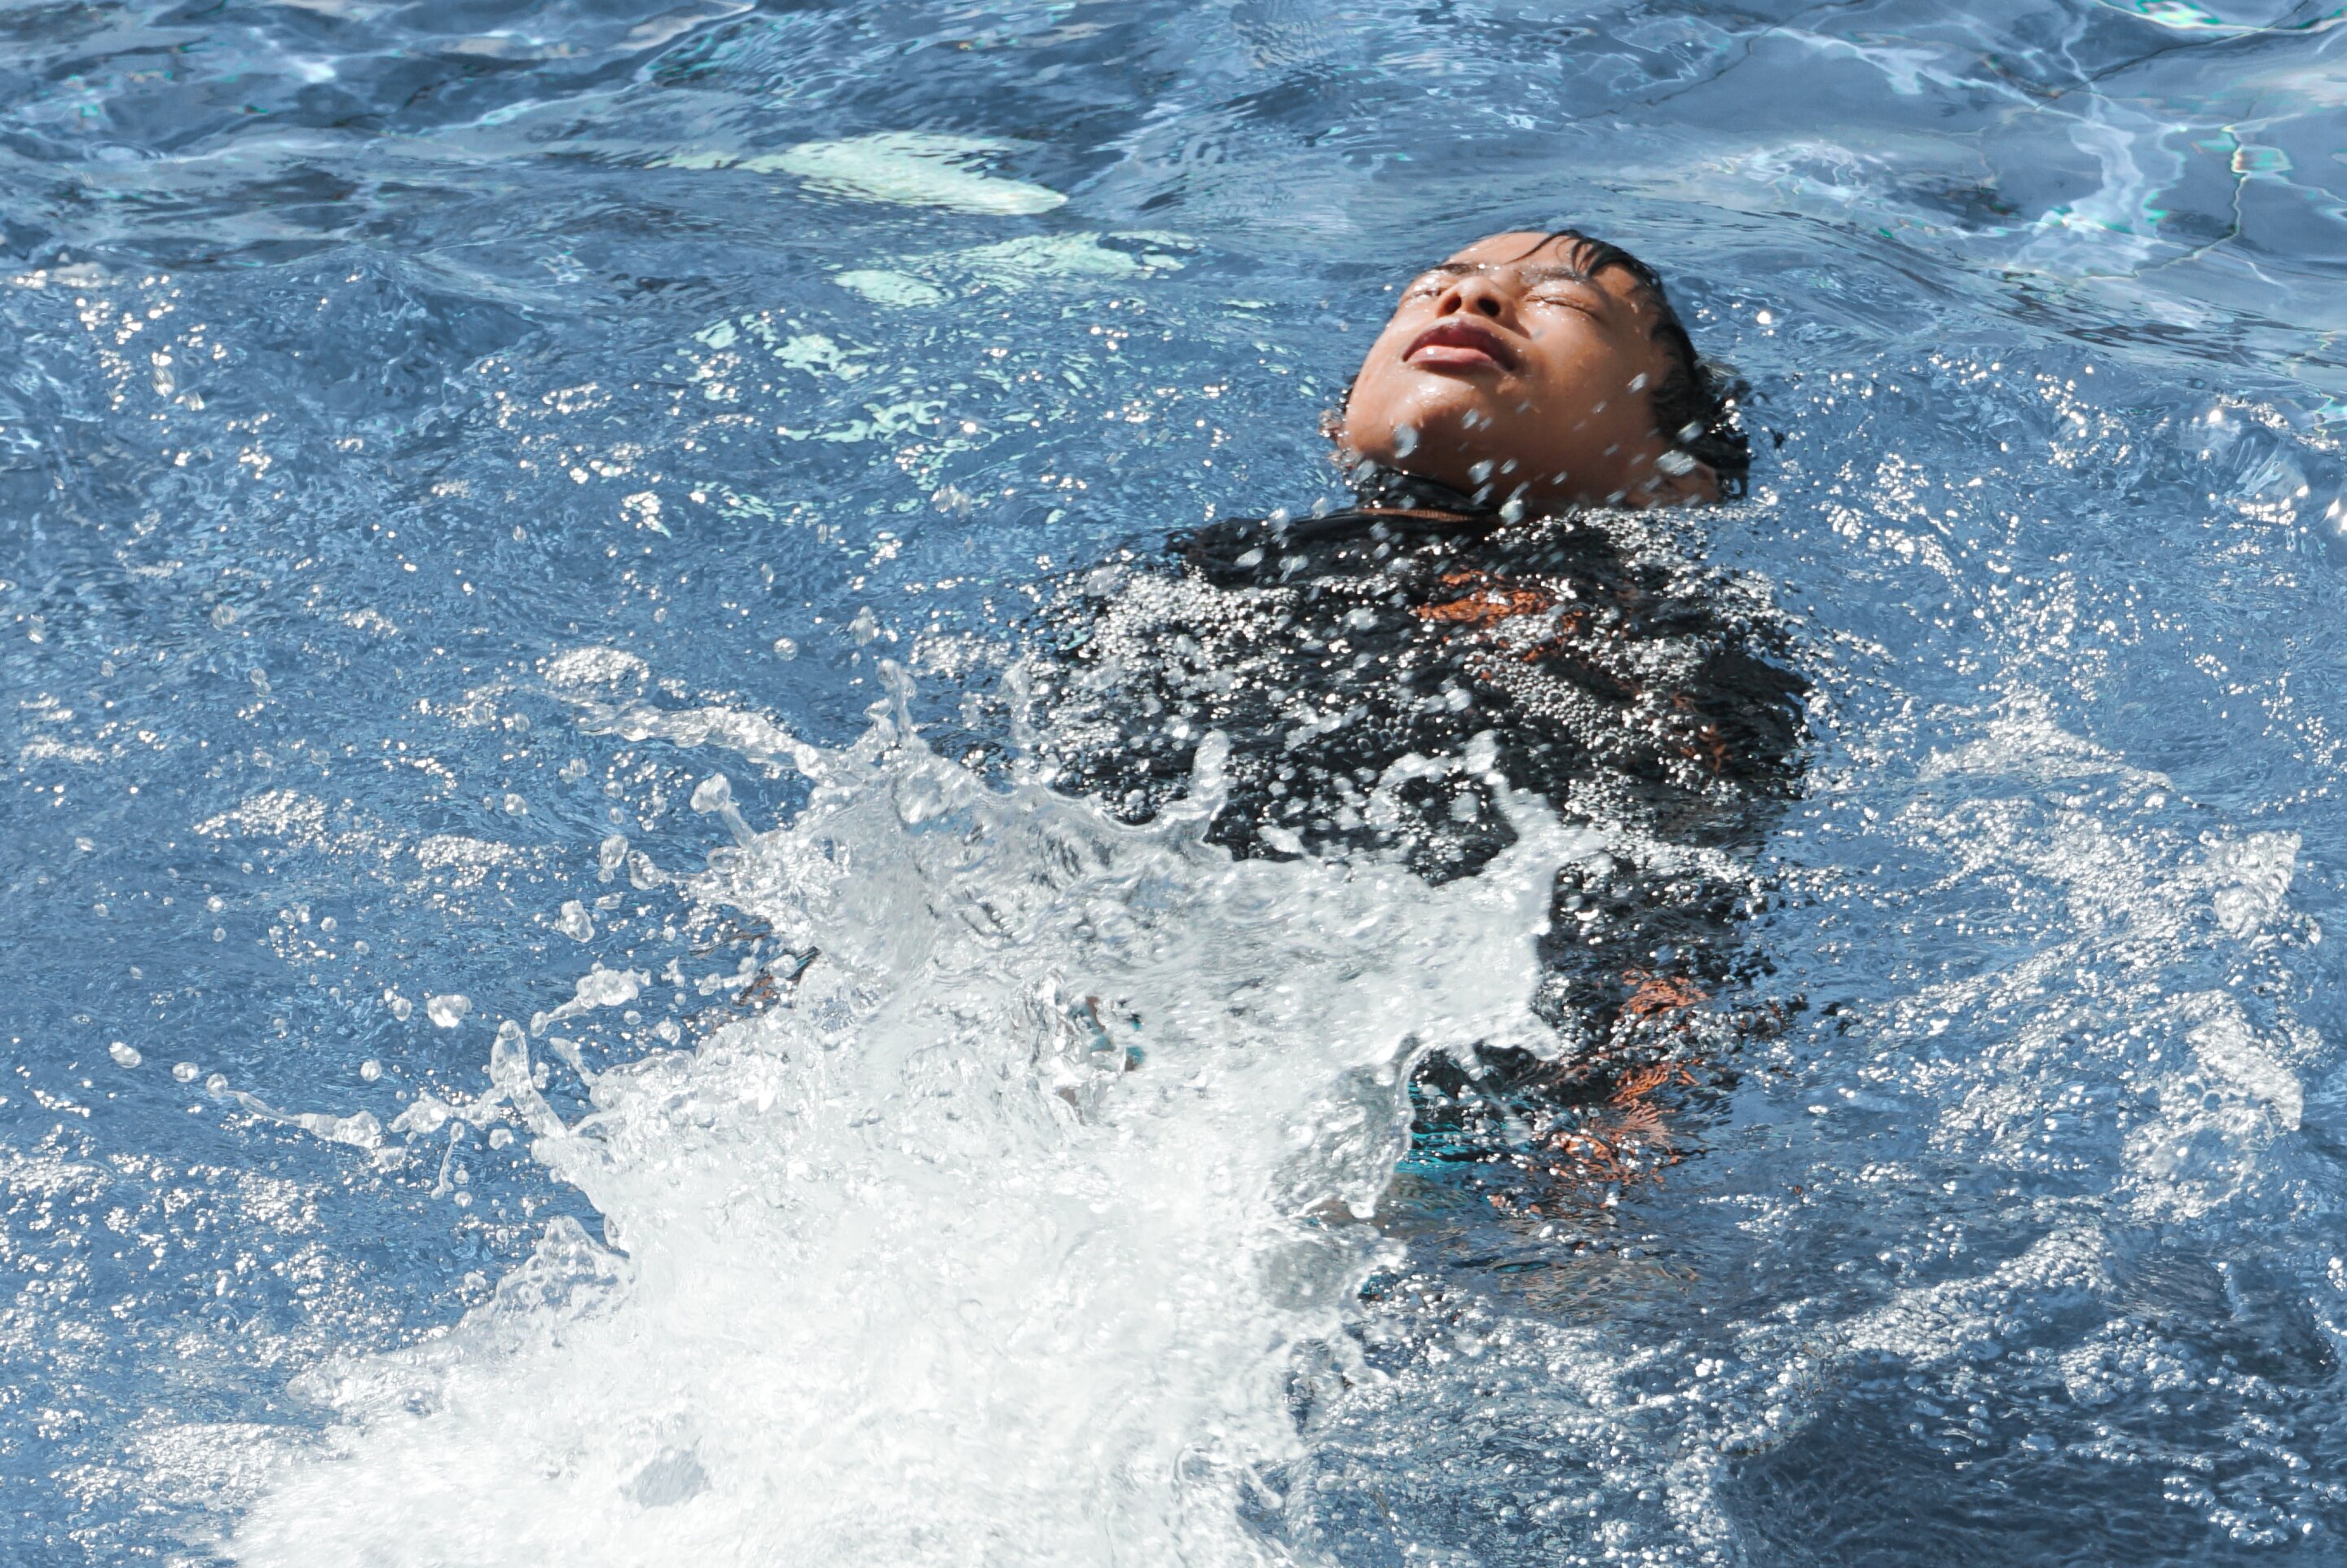 #Racial and ethnic disparities in swimming skills found across generations